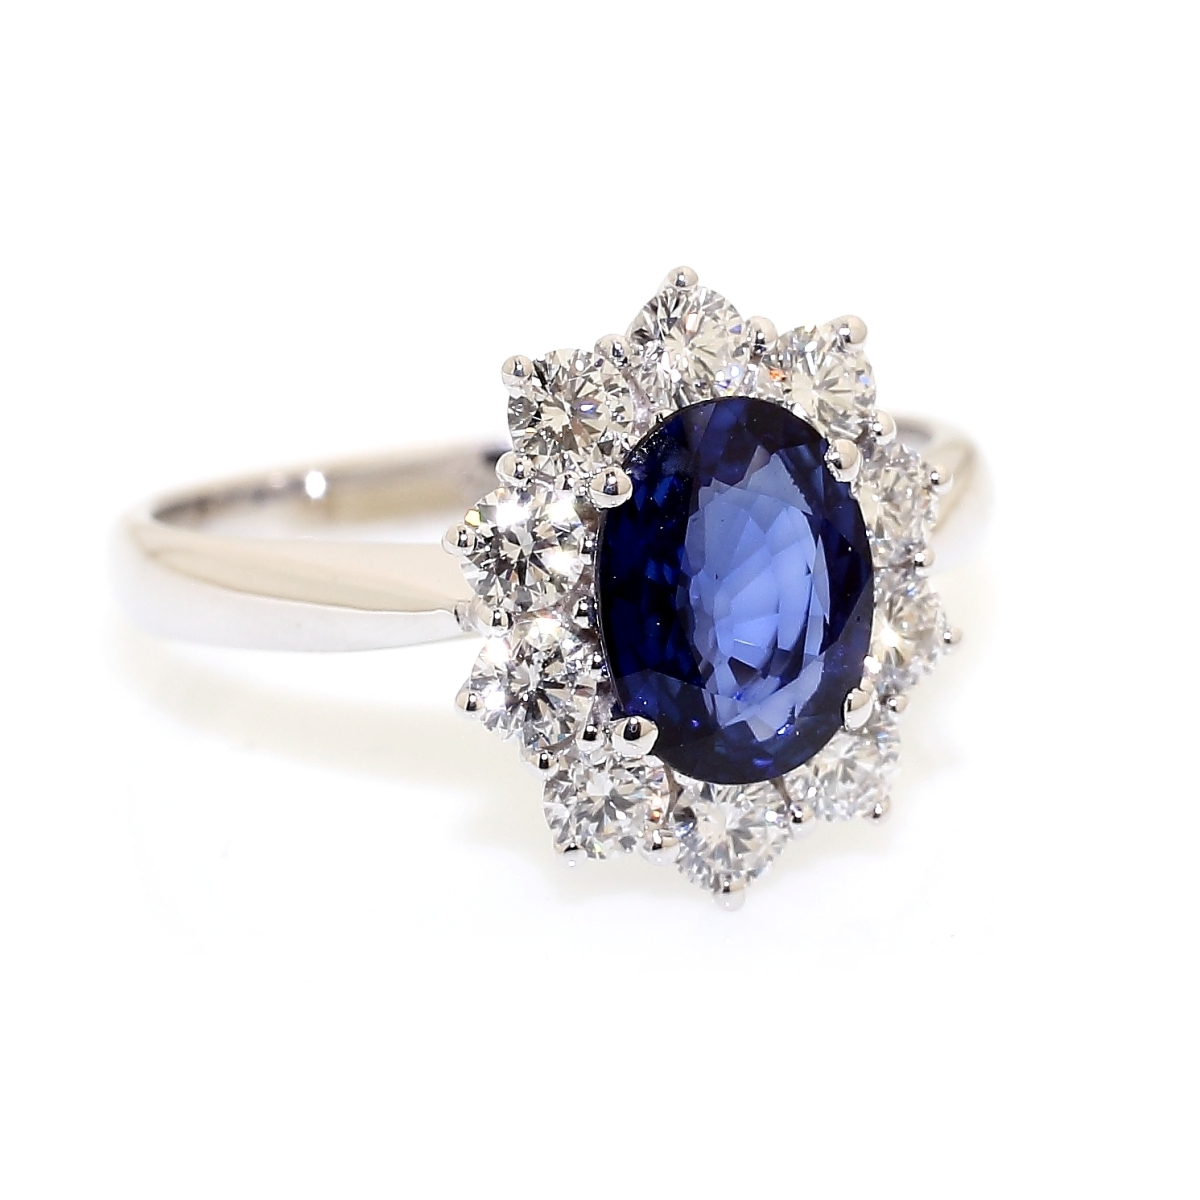 750 Mill. White Gold Ring with 0,74 Ct. Diamonds and 1,35 Ct. Sapphire